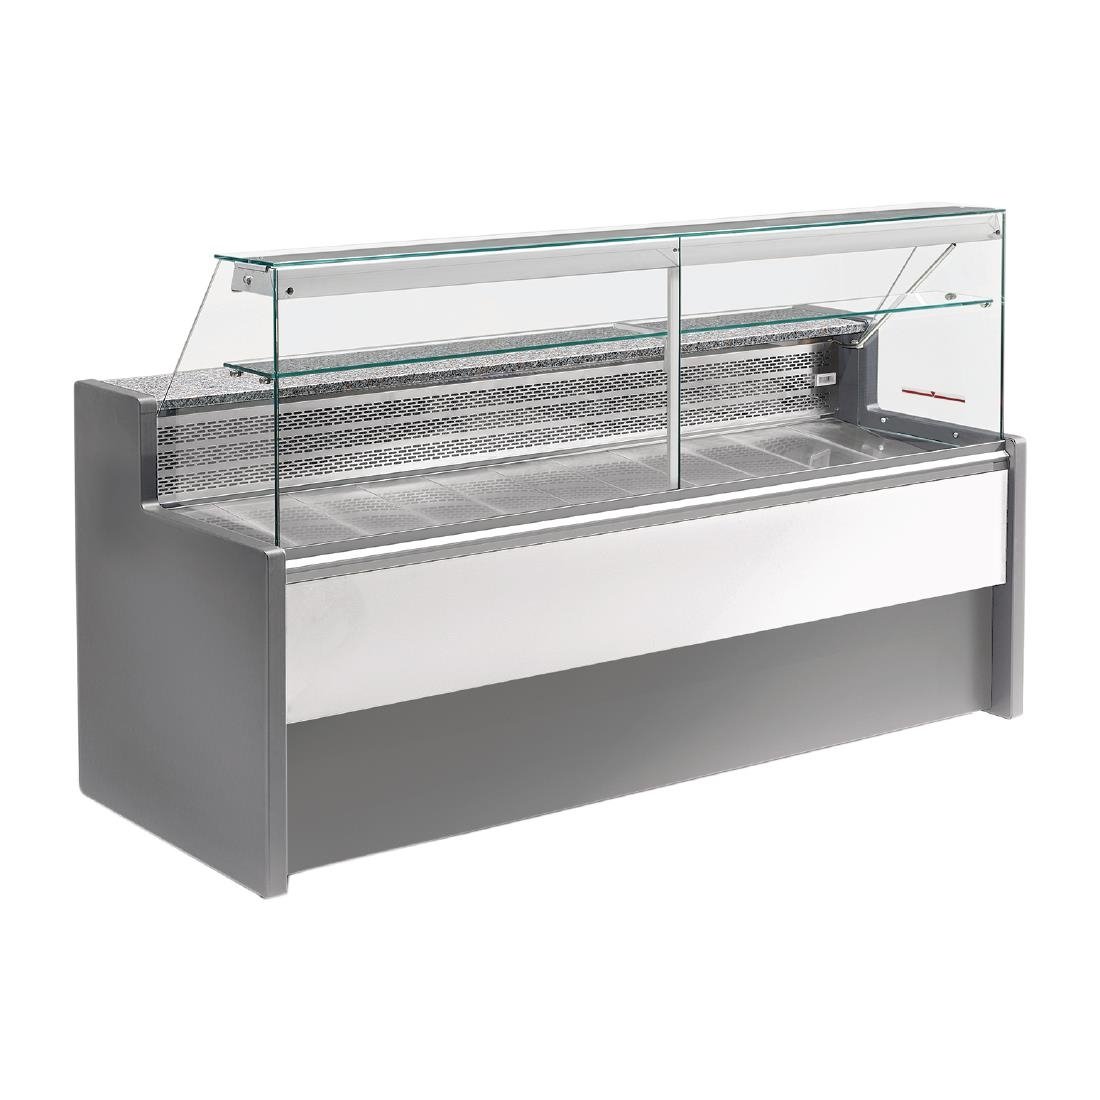 FP924-300 Zoin Tibet Serve Over Counter Grey 3000mm JD Catering Equipment Solutions Ltd